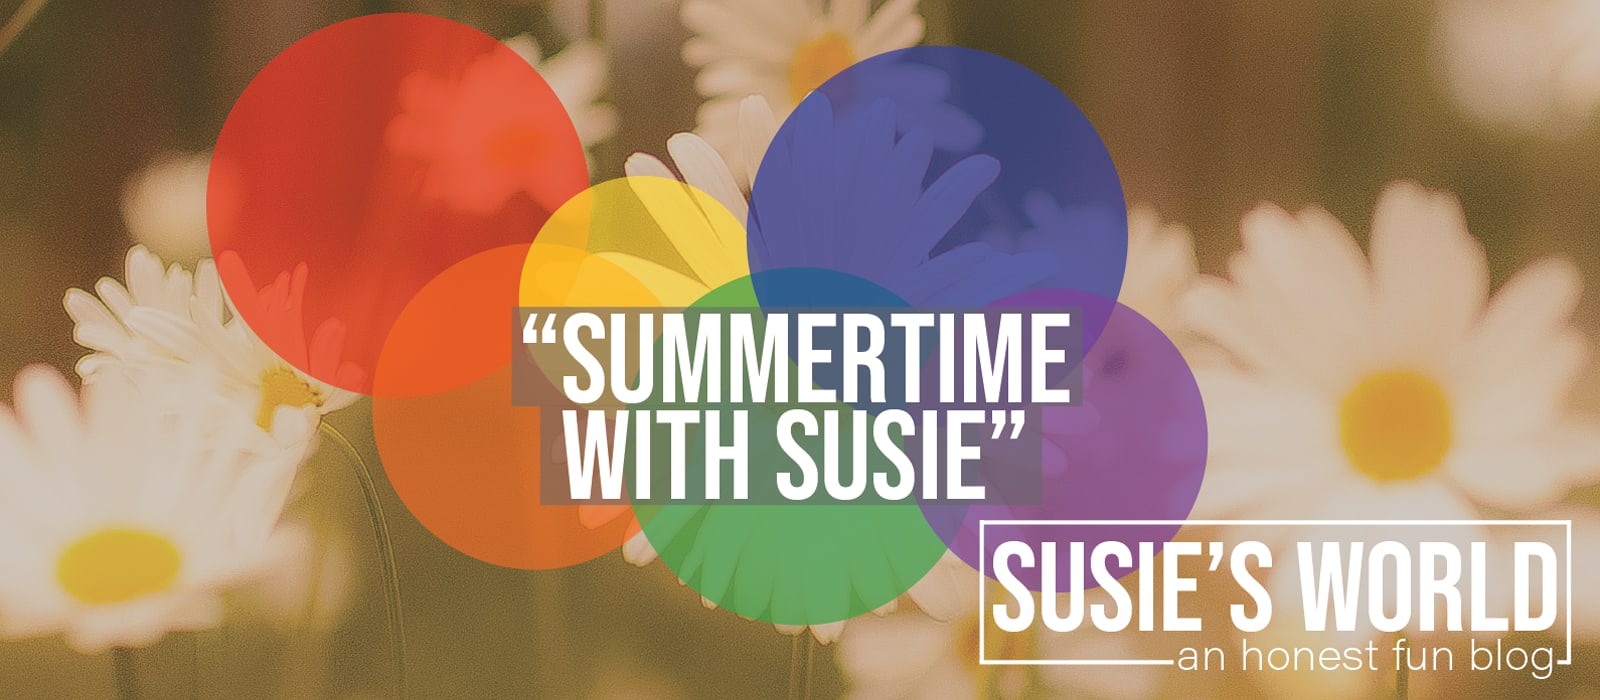 Summertime with Susie